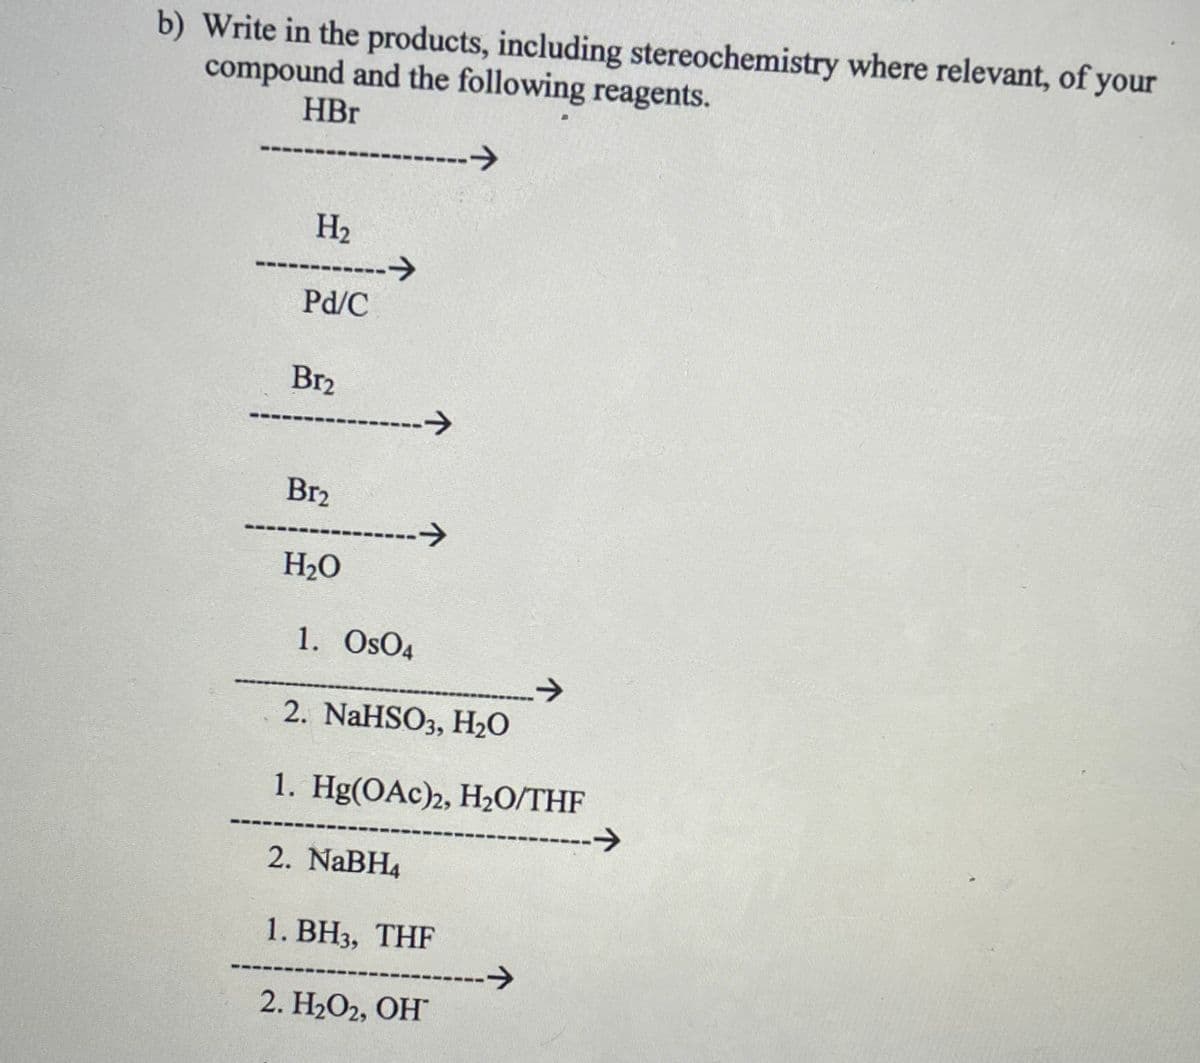 b) Write in the products, including stereochemistry where relevant, of your
compound and the following reagents.
HBr
-->
H2
---------->
Pd/C
Br2
------->
Br2
---->
H2O
1. OsO4
2. NaHSO3, H2O
1. Hg(OAc)2, H20/THF
->
2. NaBH4
1. ВН3, ТHF
->
2. H2О2, ОН
